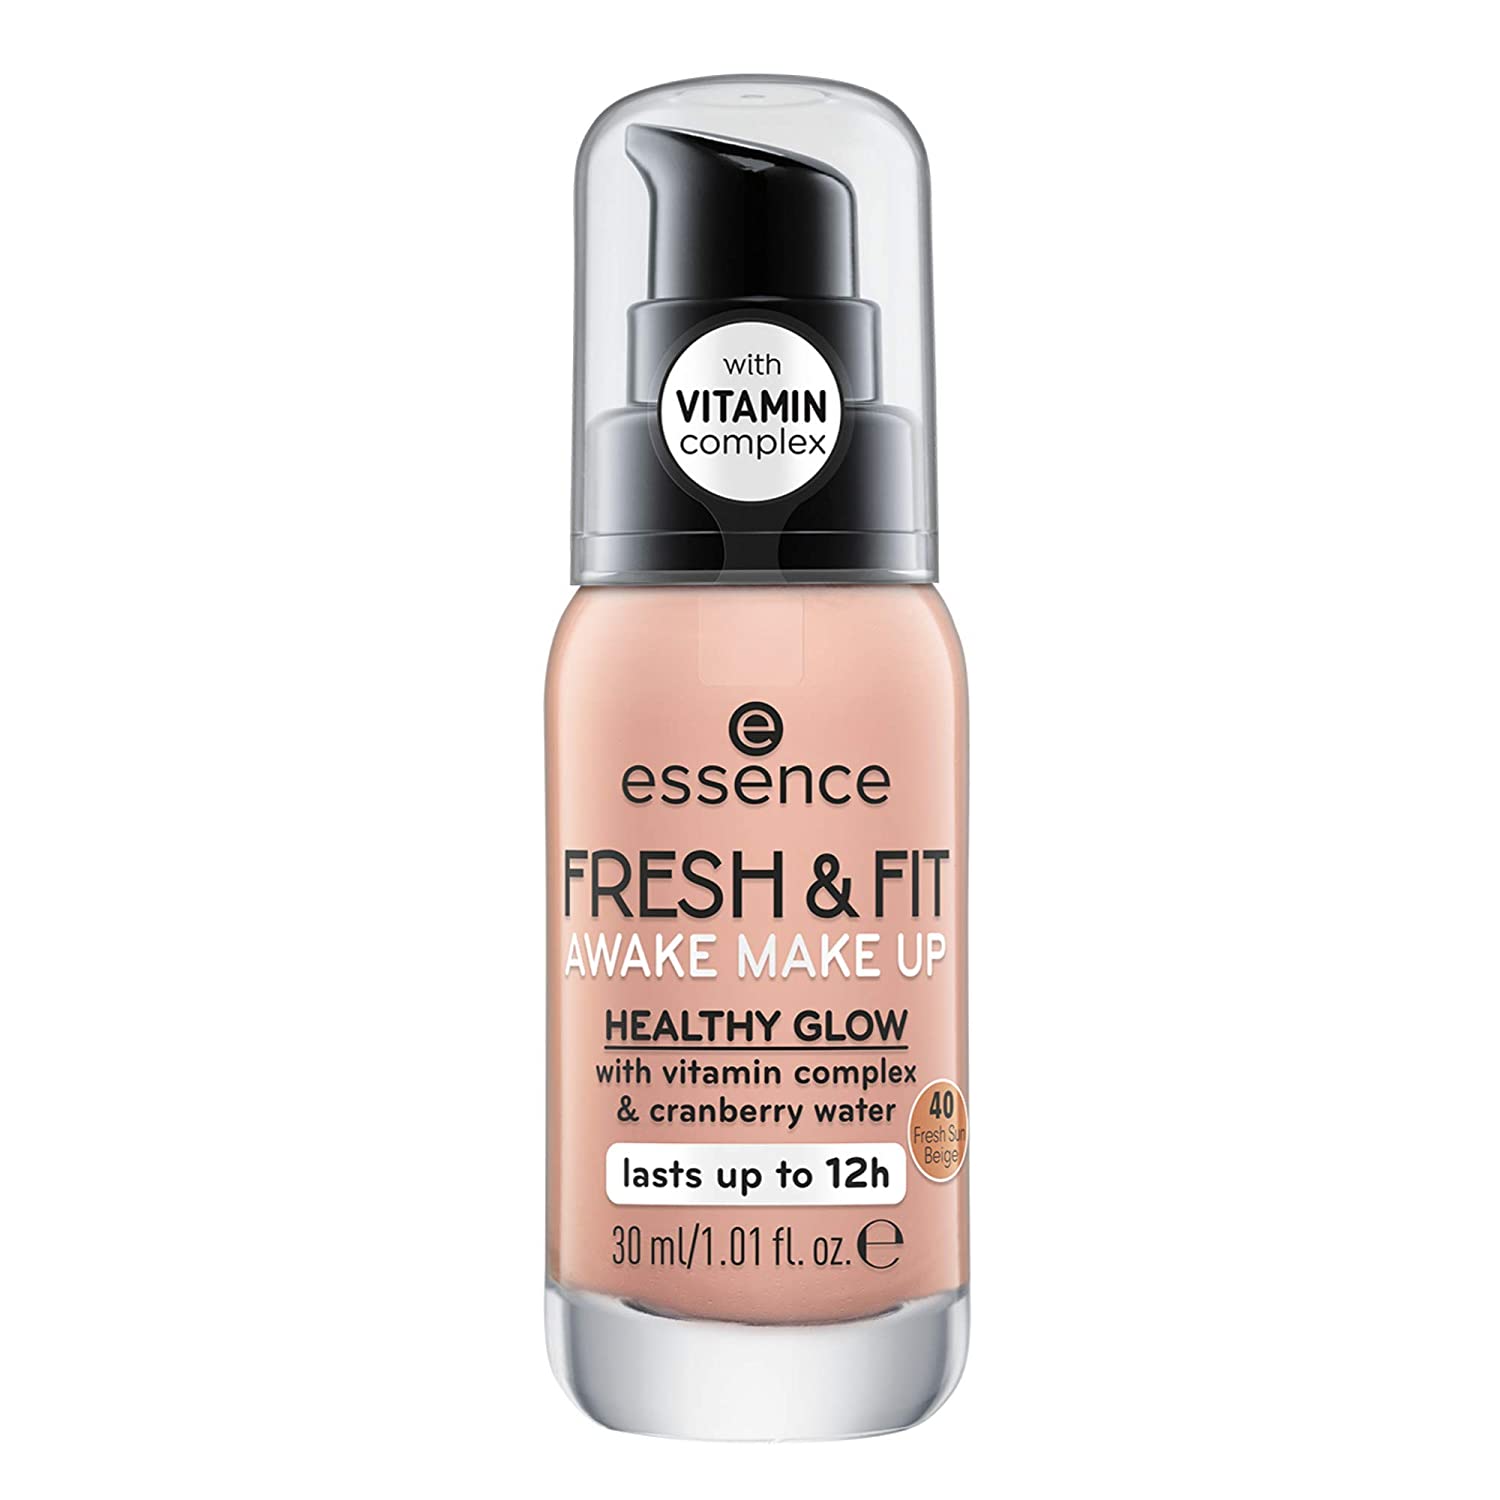 essence cosmetics essence Fresh & Fit Awake Make Up, Foundation, Healthy Shine with Vitamin Complex & Cranberry Water, Lasts up to 12 Hours, No. 40 Fresh Sun Beige, Nude, Paraben Free, Gluten Free (30 ml), ‎40 beige